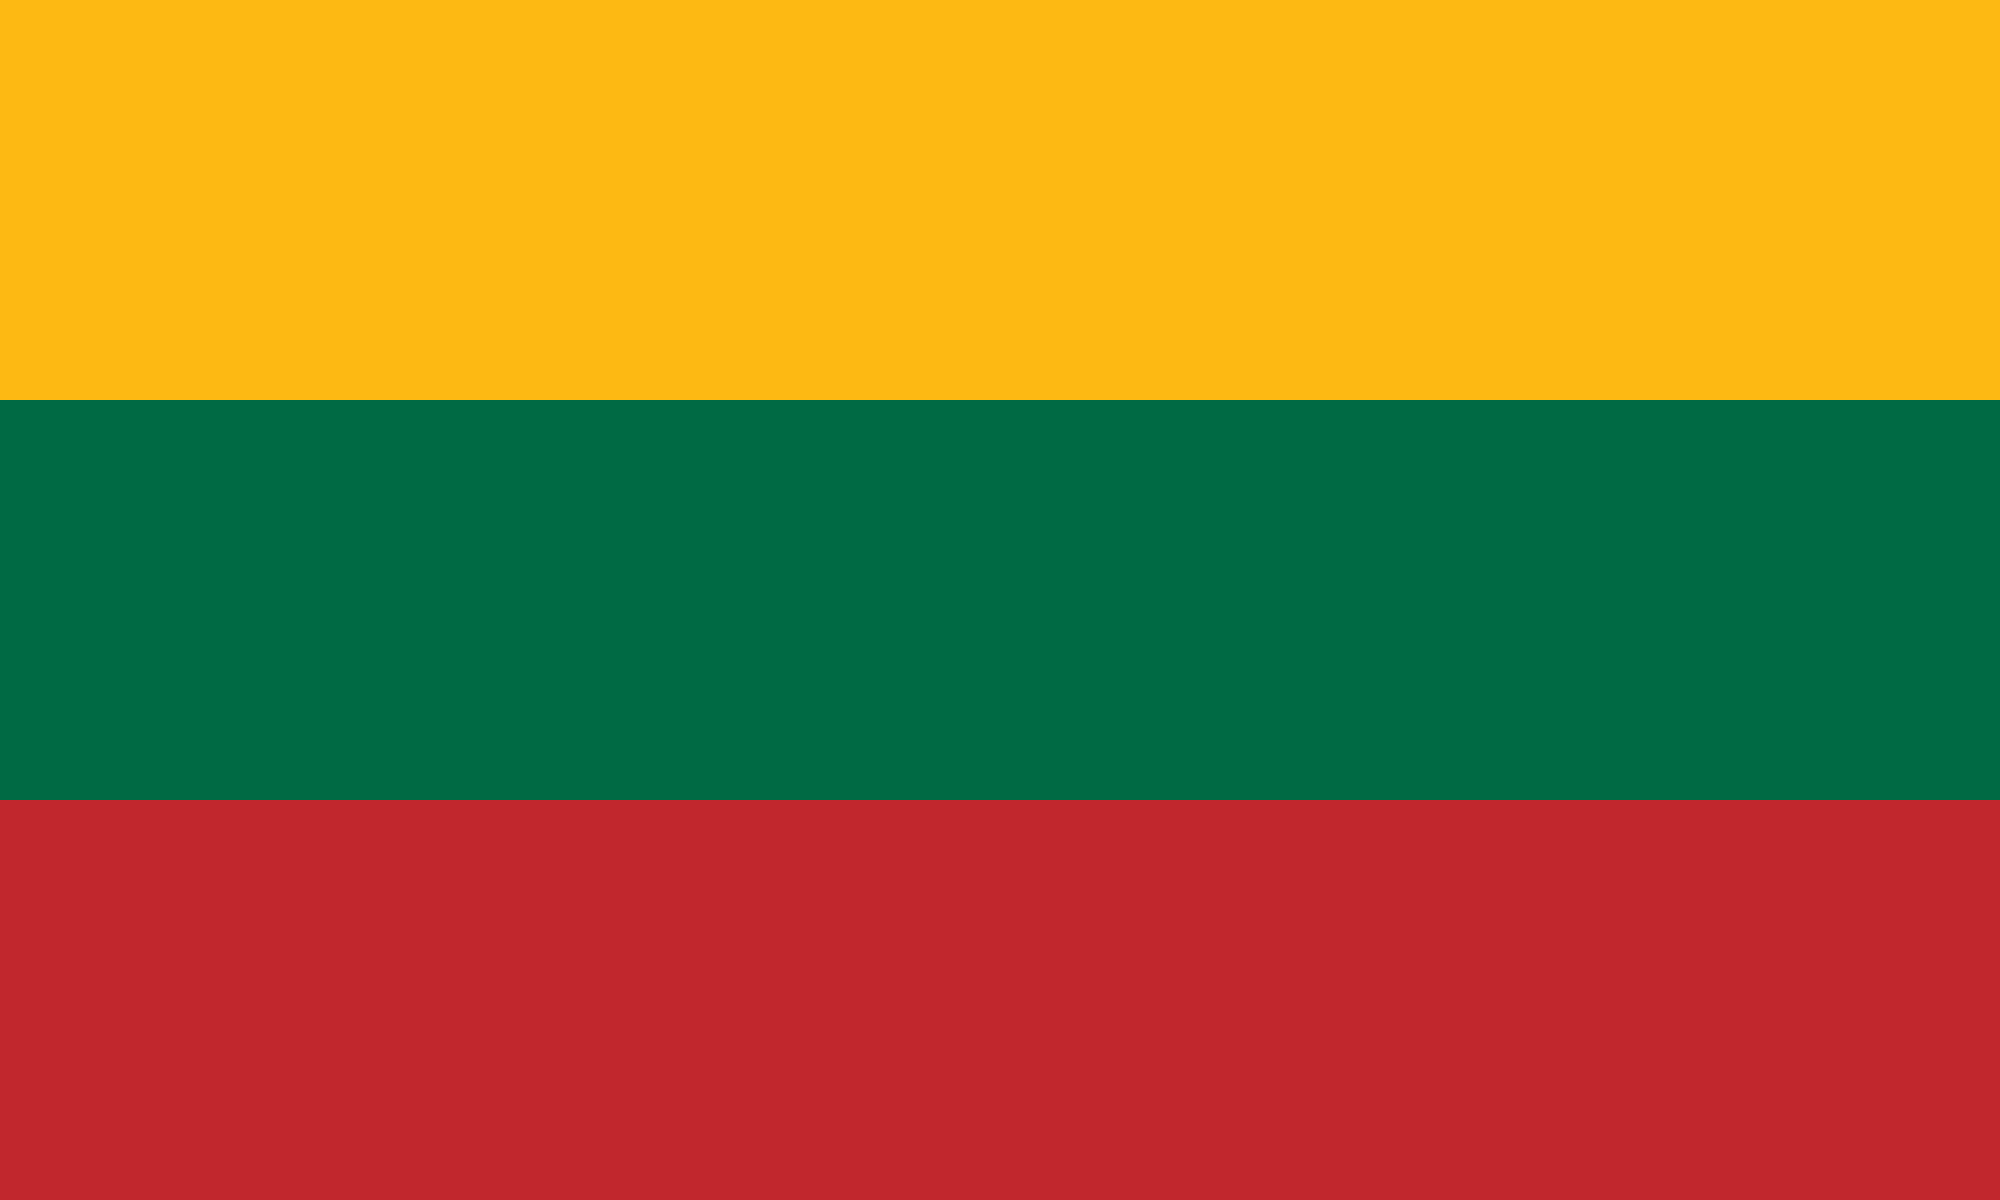 Red and Green C Logo - Flag of Lithuania